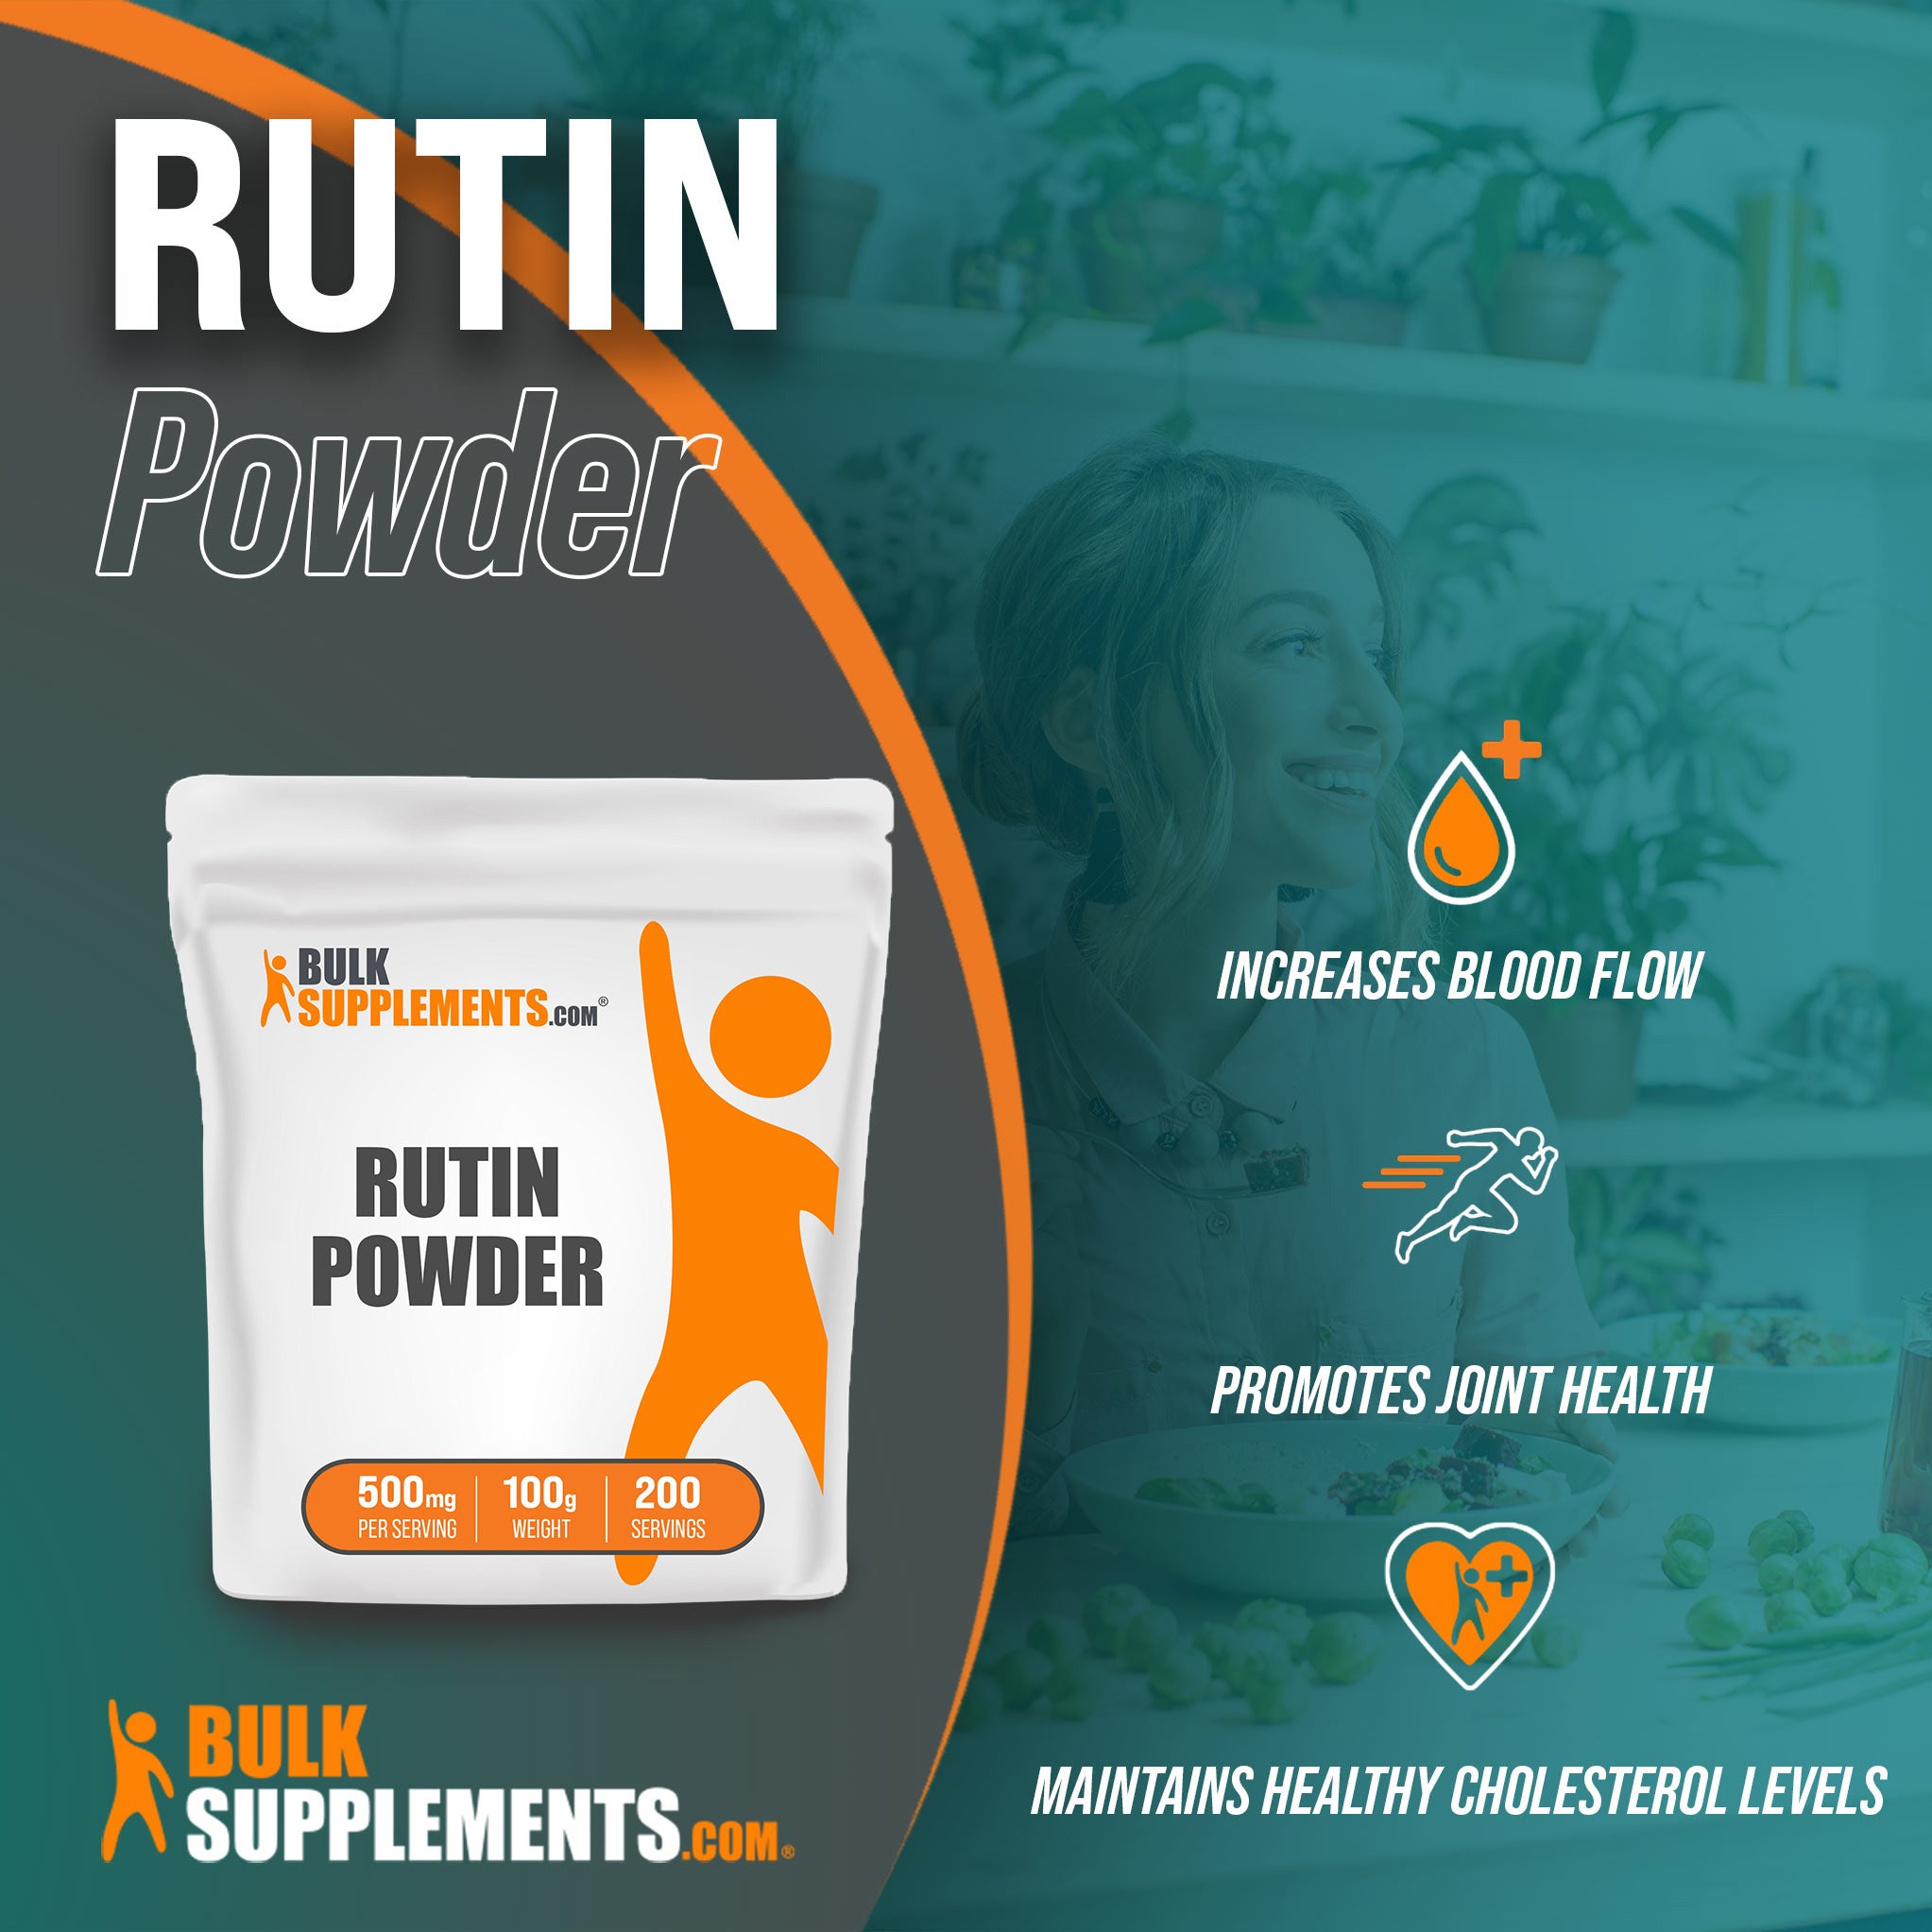 Benefits of Rutin Powder: increases blood flow, promotes joint health, maintains healthy cholesterol levels